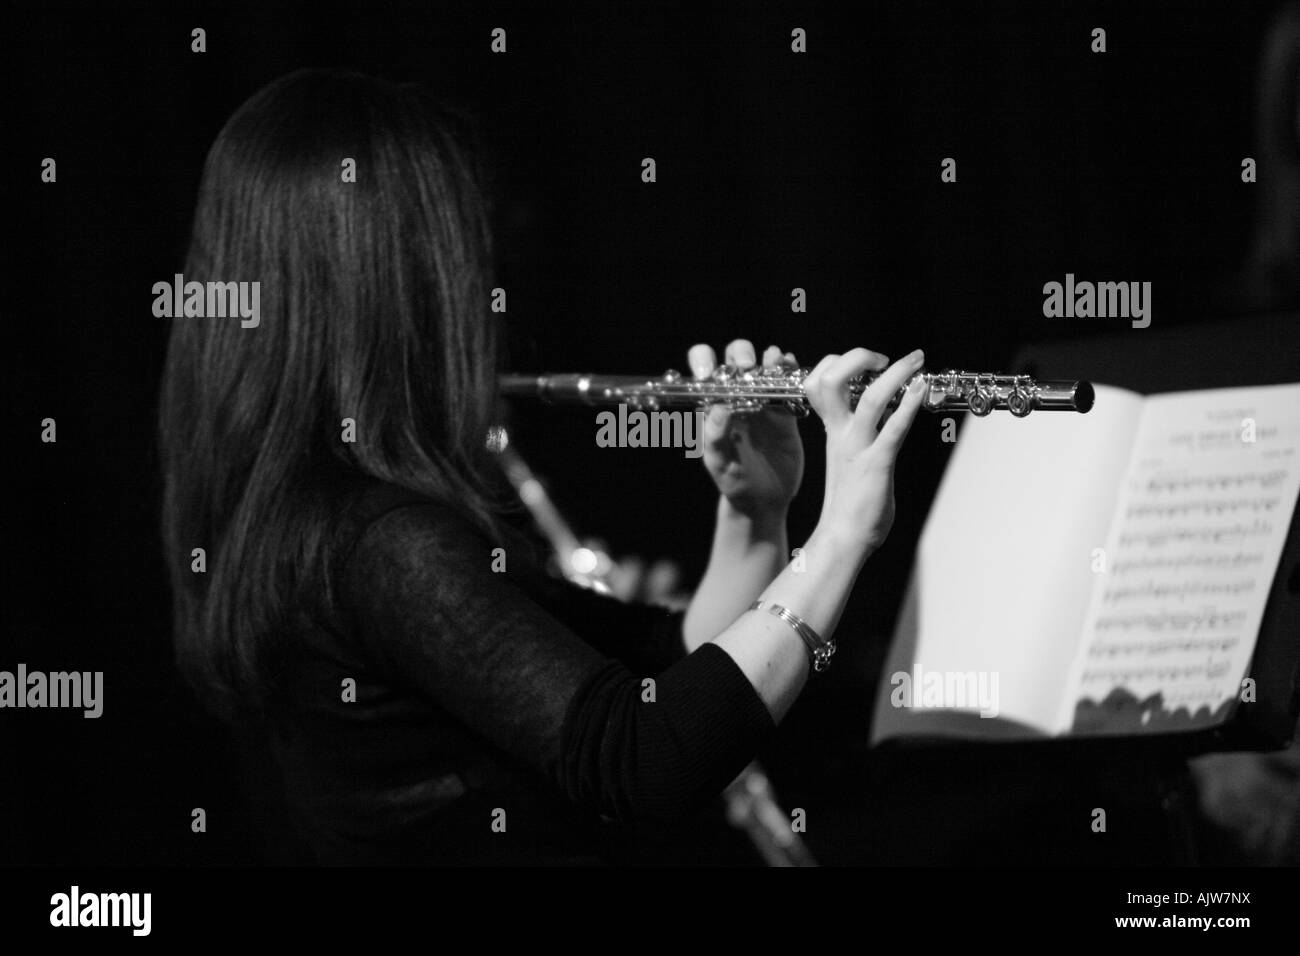 A girl plays the flute at a school concert. Black and white image Stock Photo